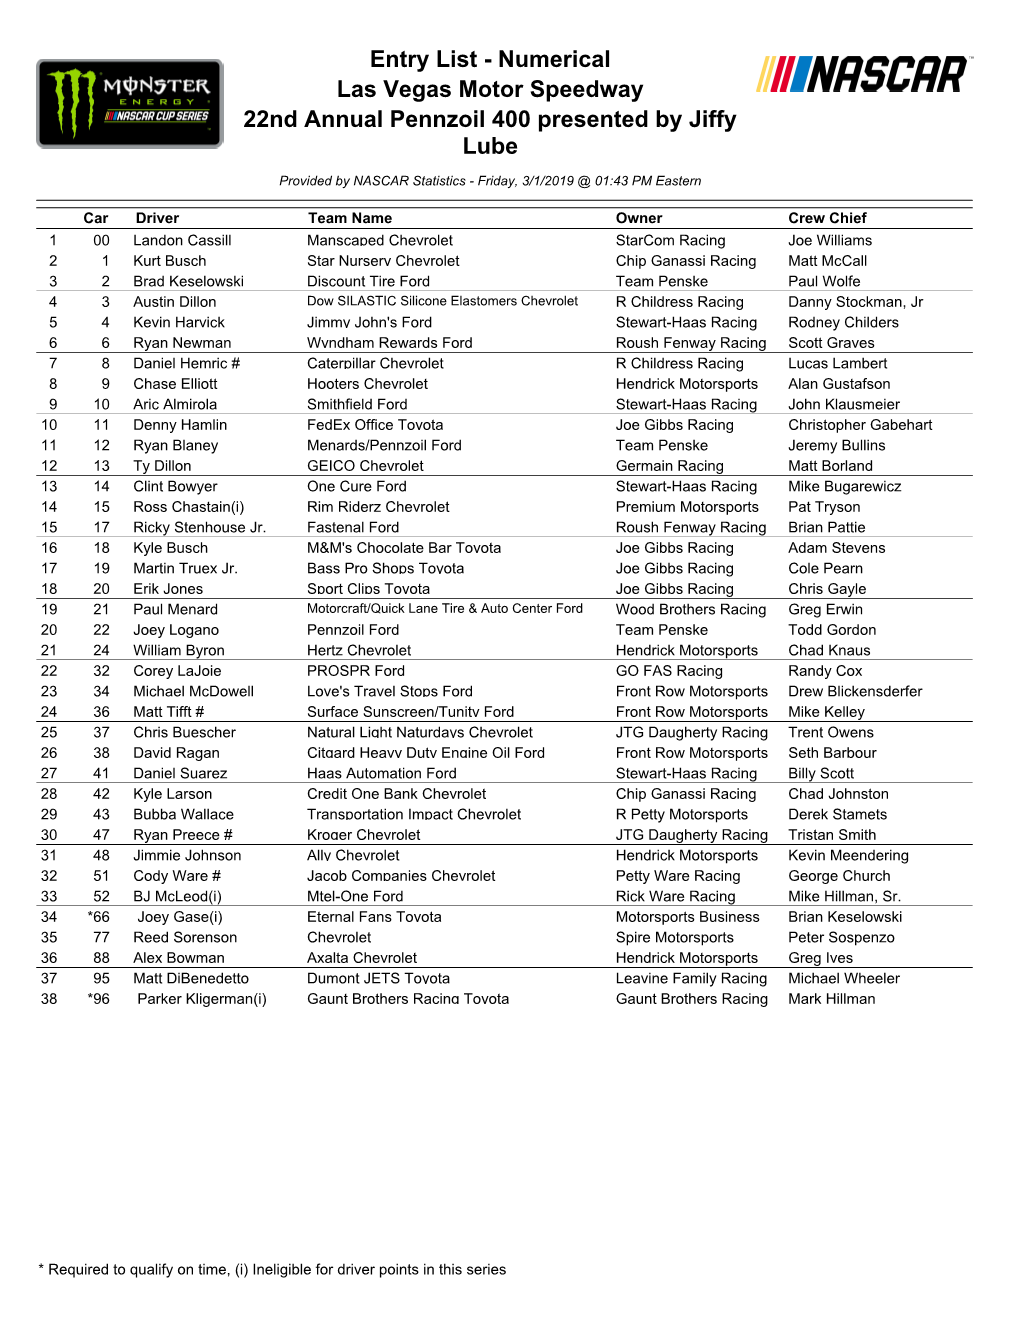 Entry List - Numerical Las Vegas Motor Speedway 22Nd Annual Pennzoil 400 Presented by Jiffy Lube